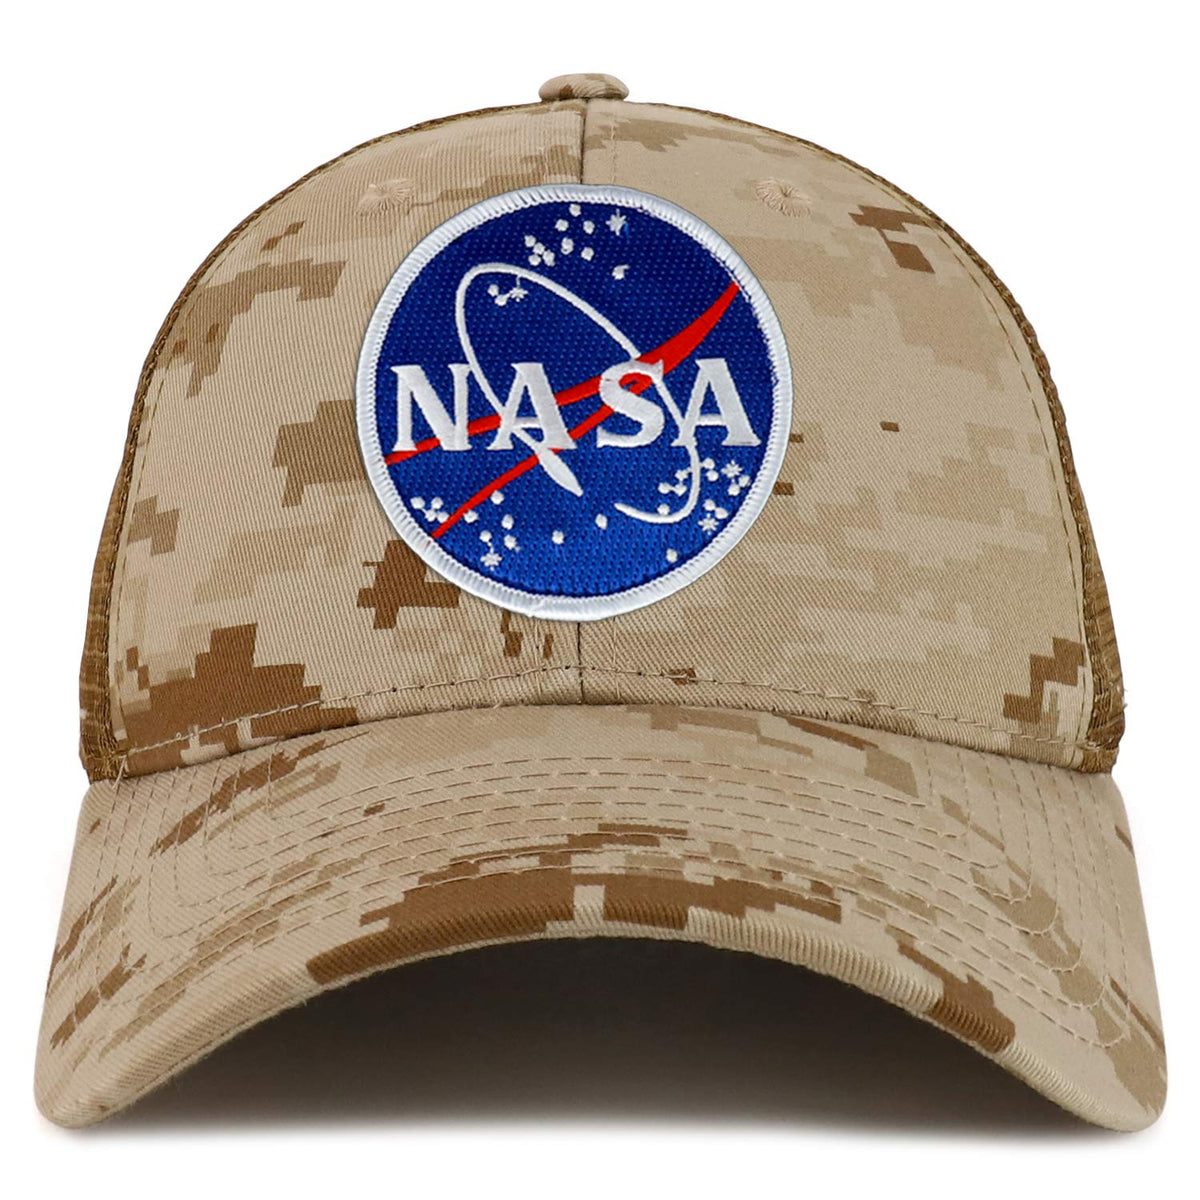 Armycrew NASA Meatball Logo Patch Camouflage Structured Mesh Trucker Cap